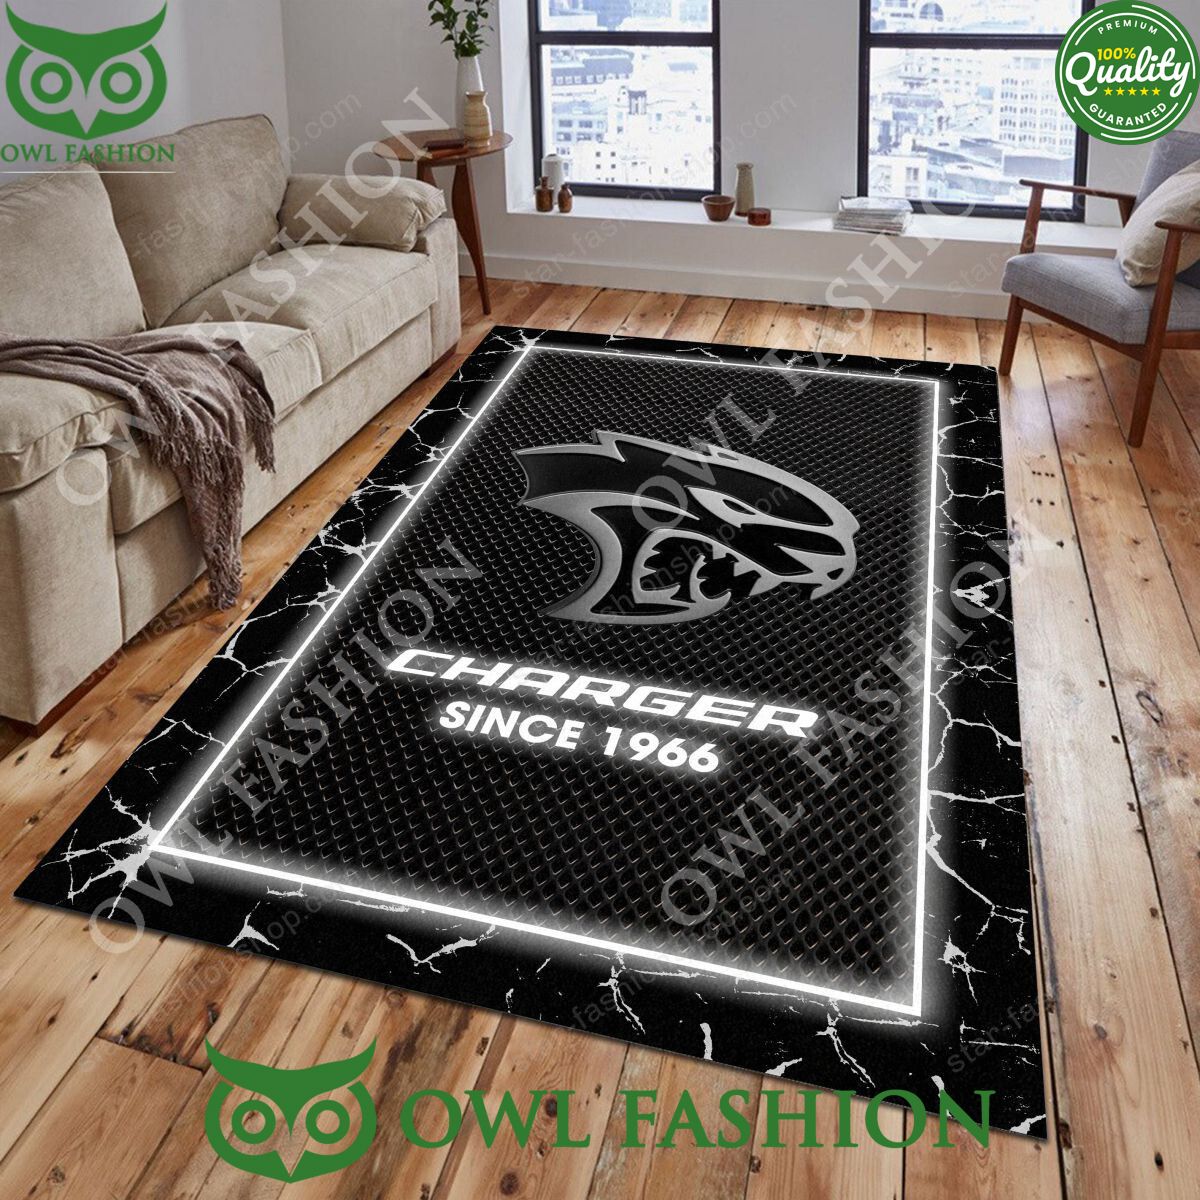 Dodge Charger Four-door Muscle Car Carpet Rug